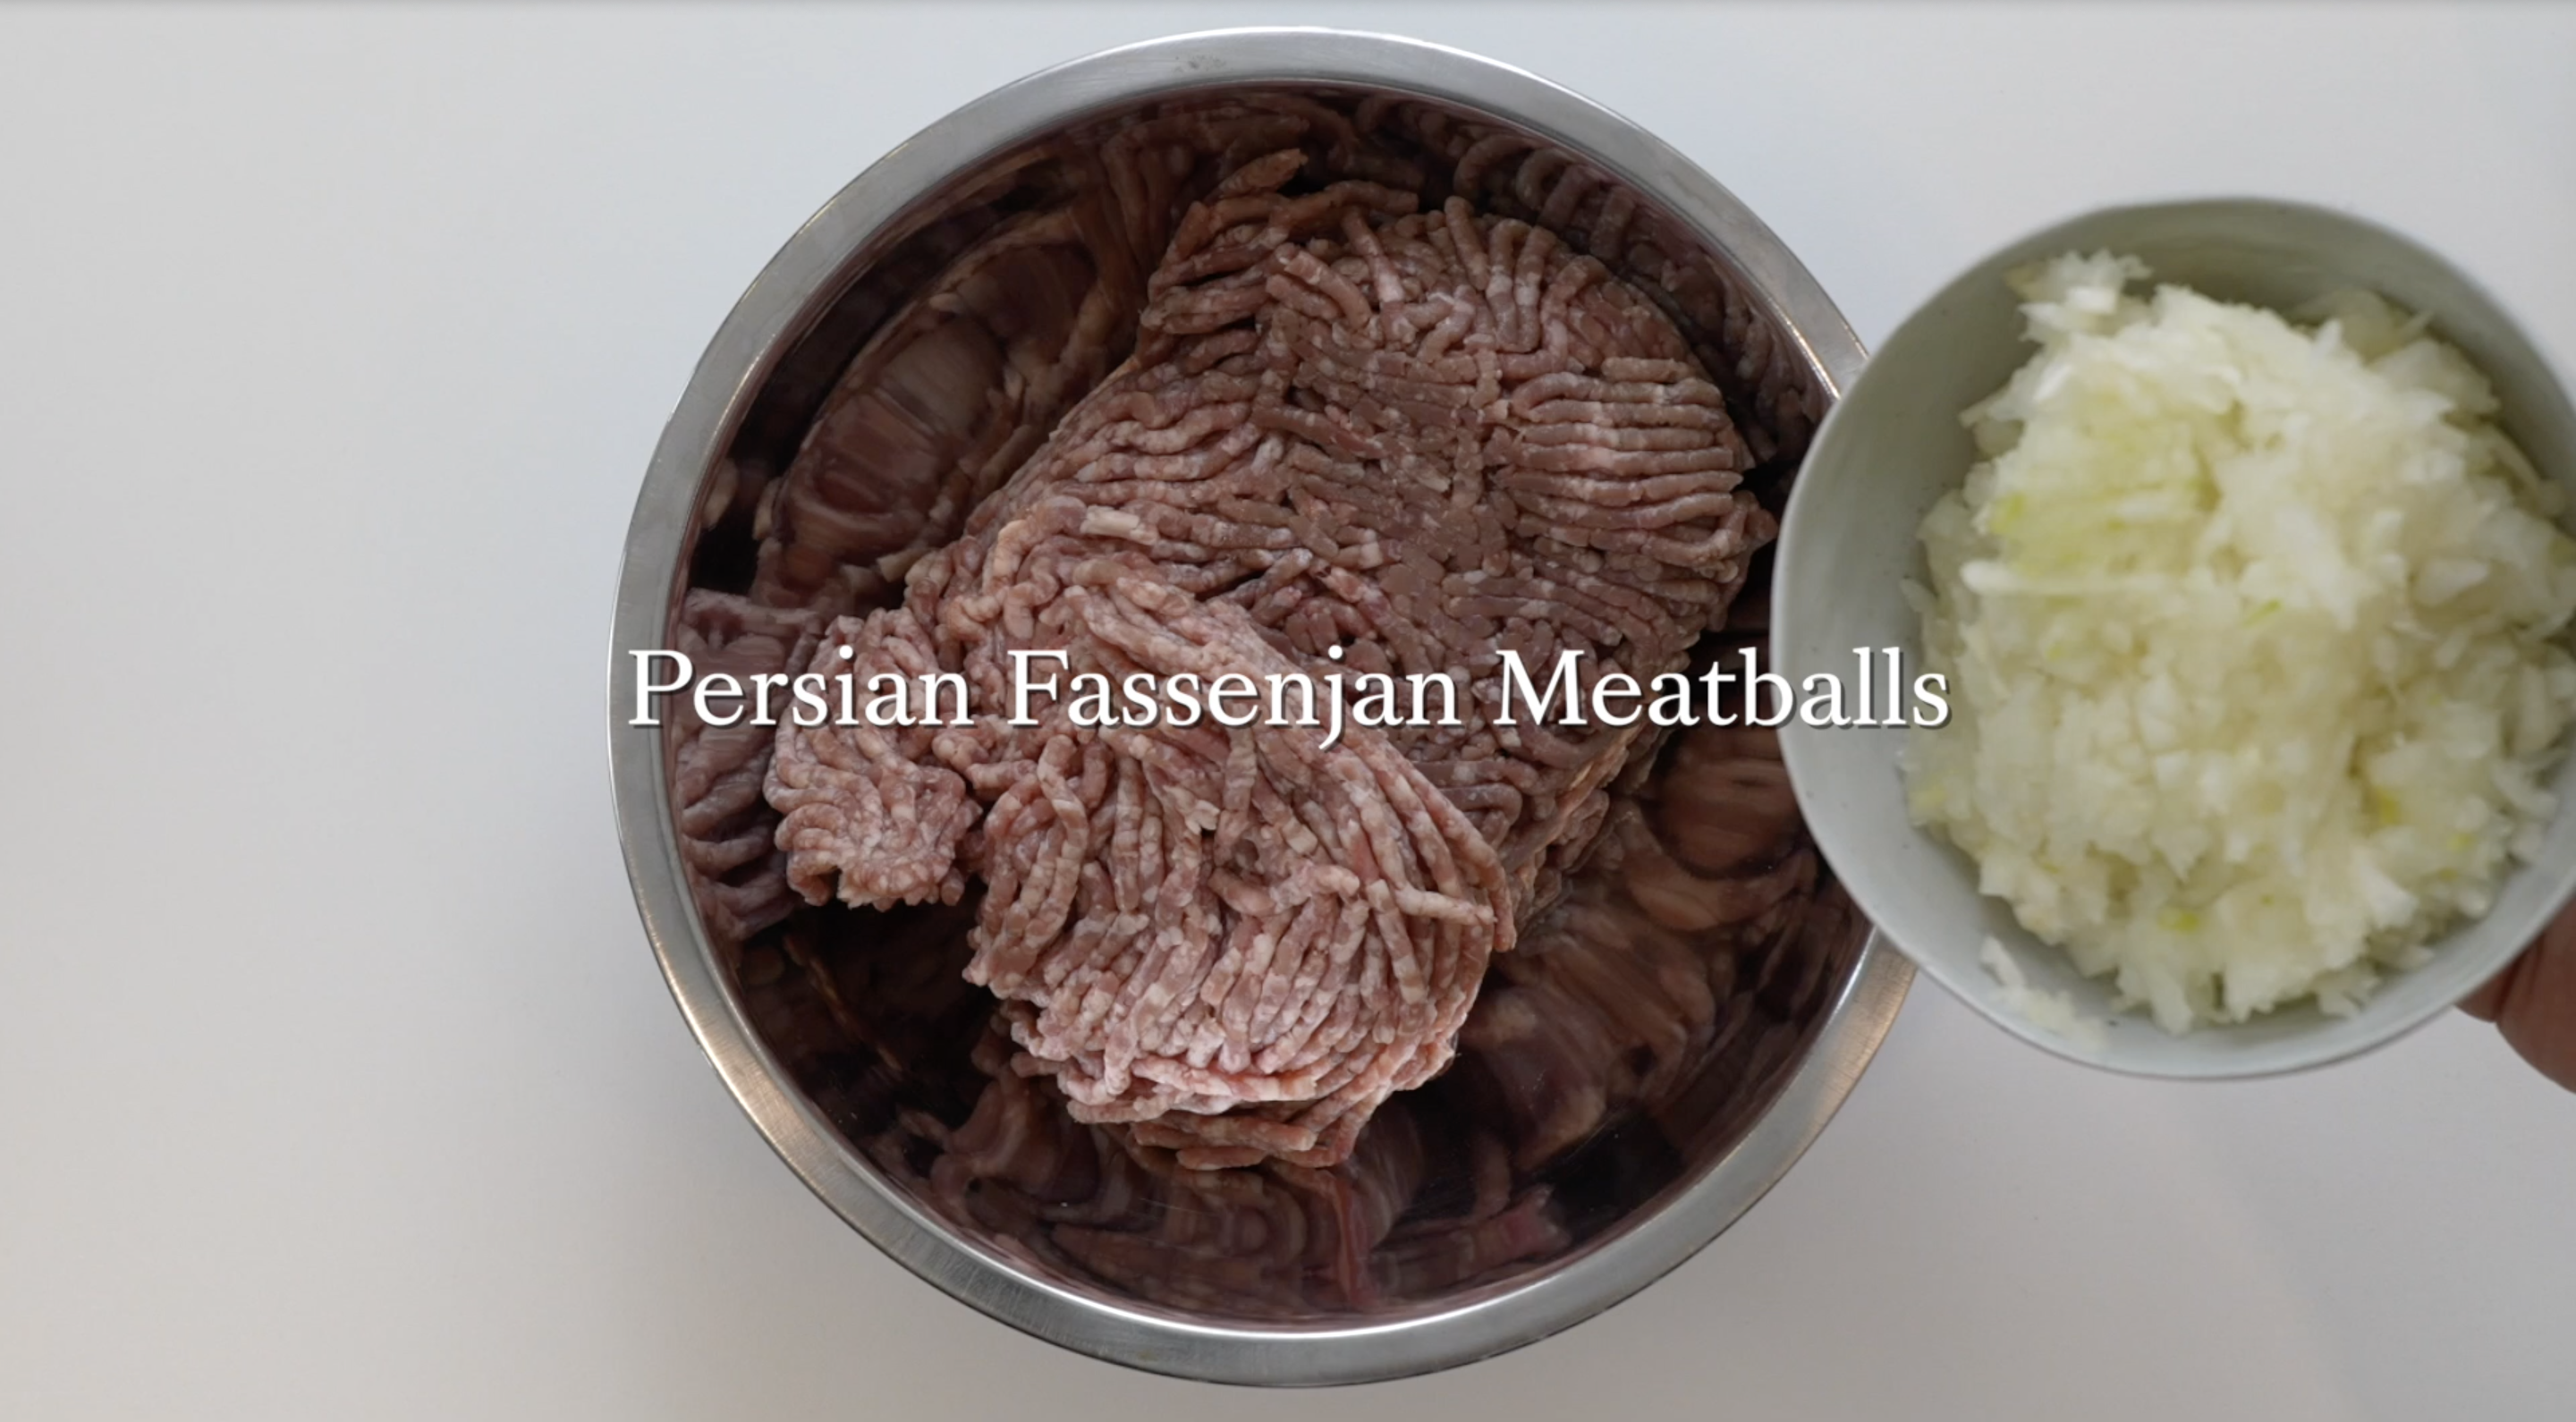 A bowl of minced meat and a smaller bowl of chopped onions, for making Persian Fassenjan Meatballs